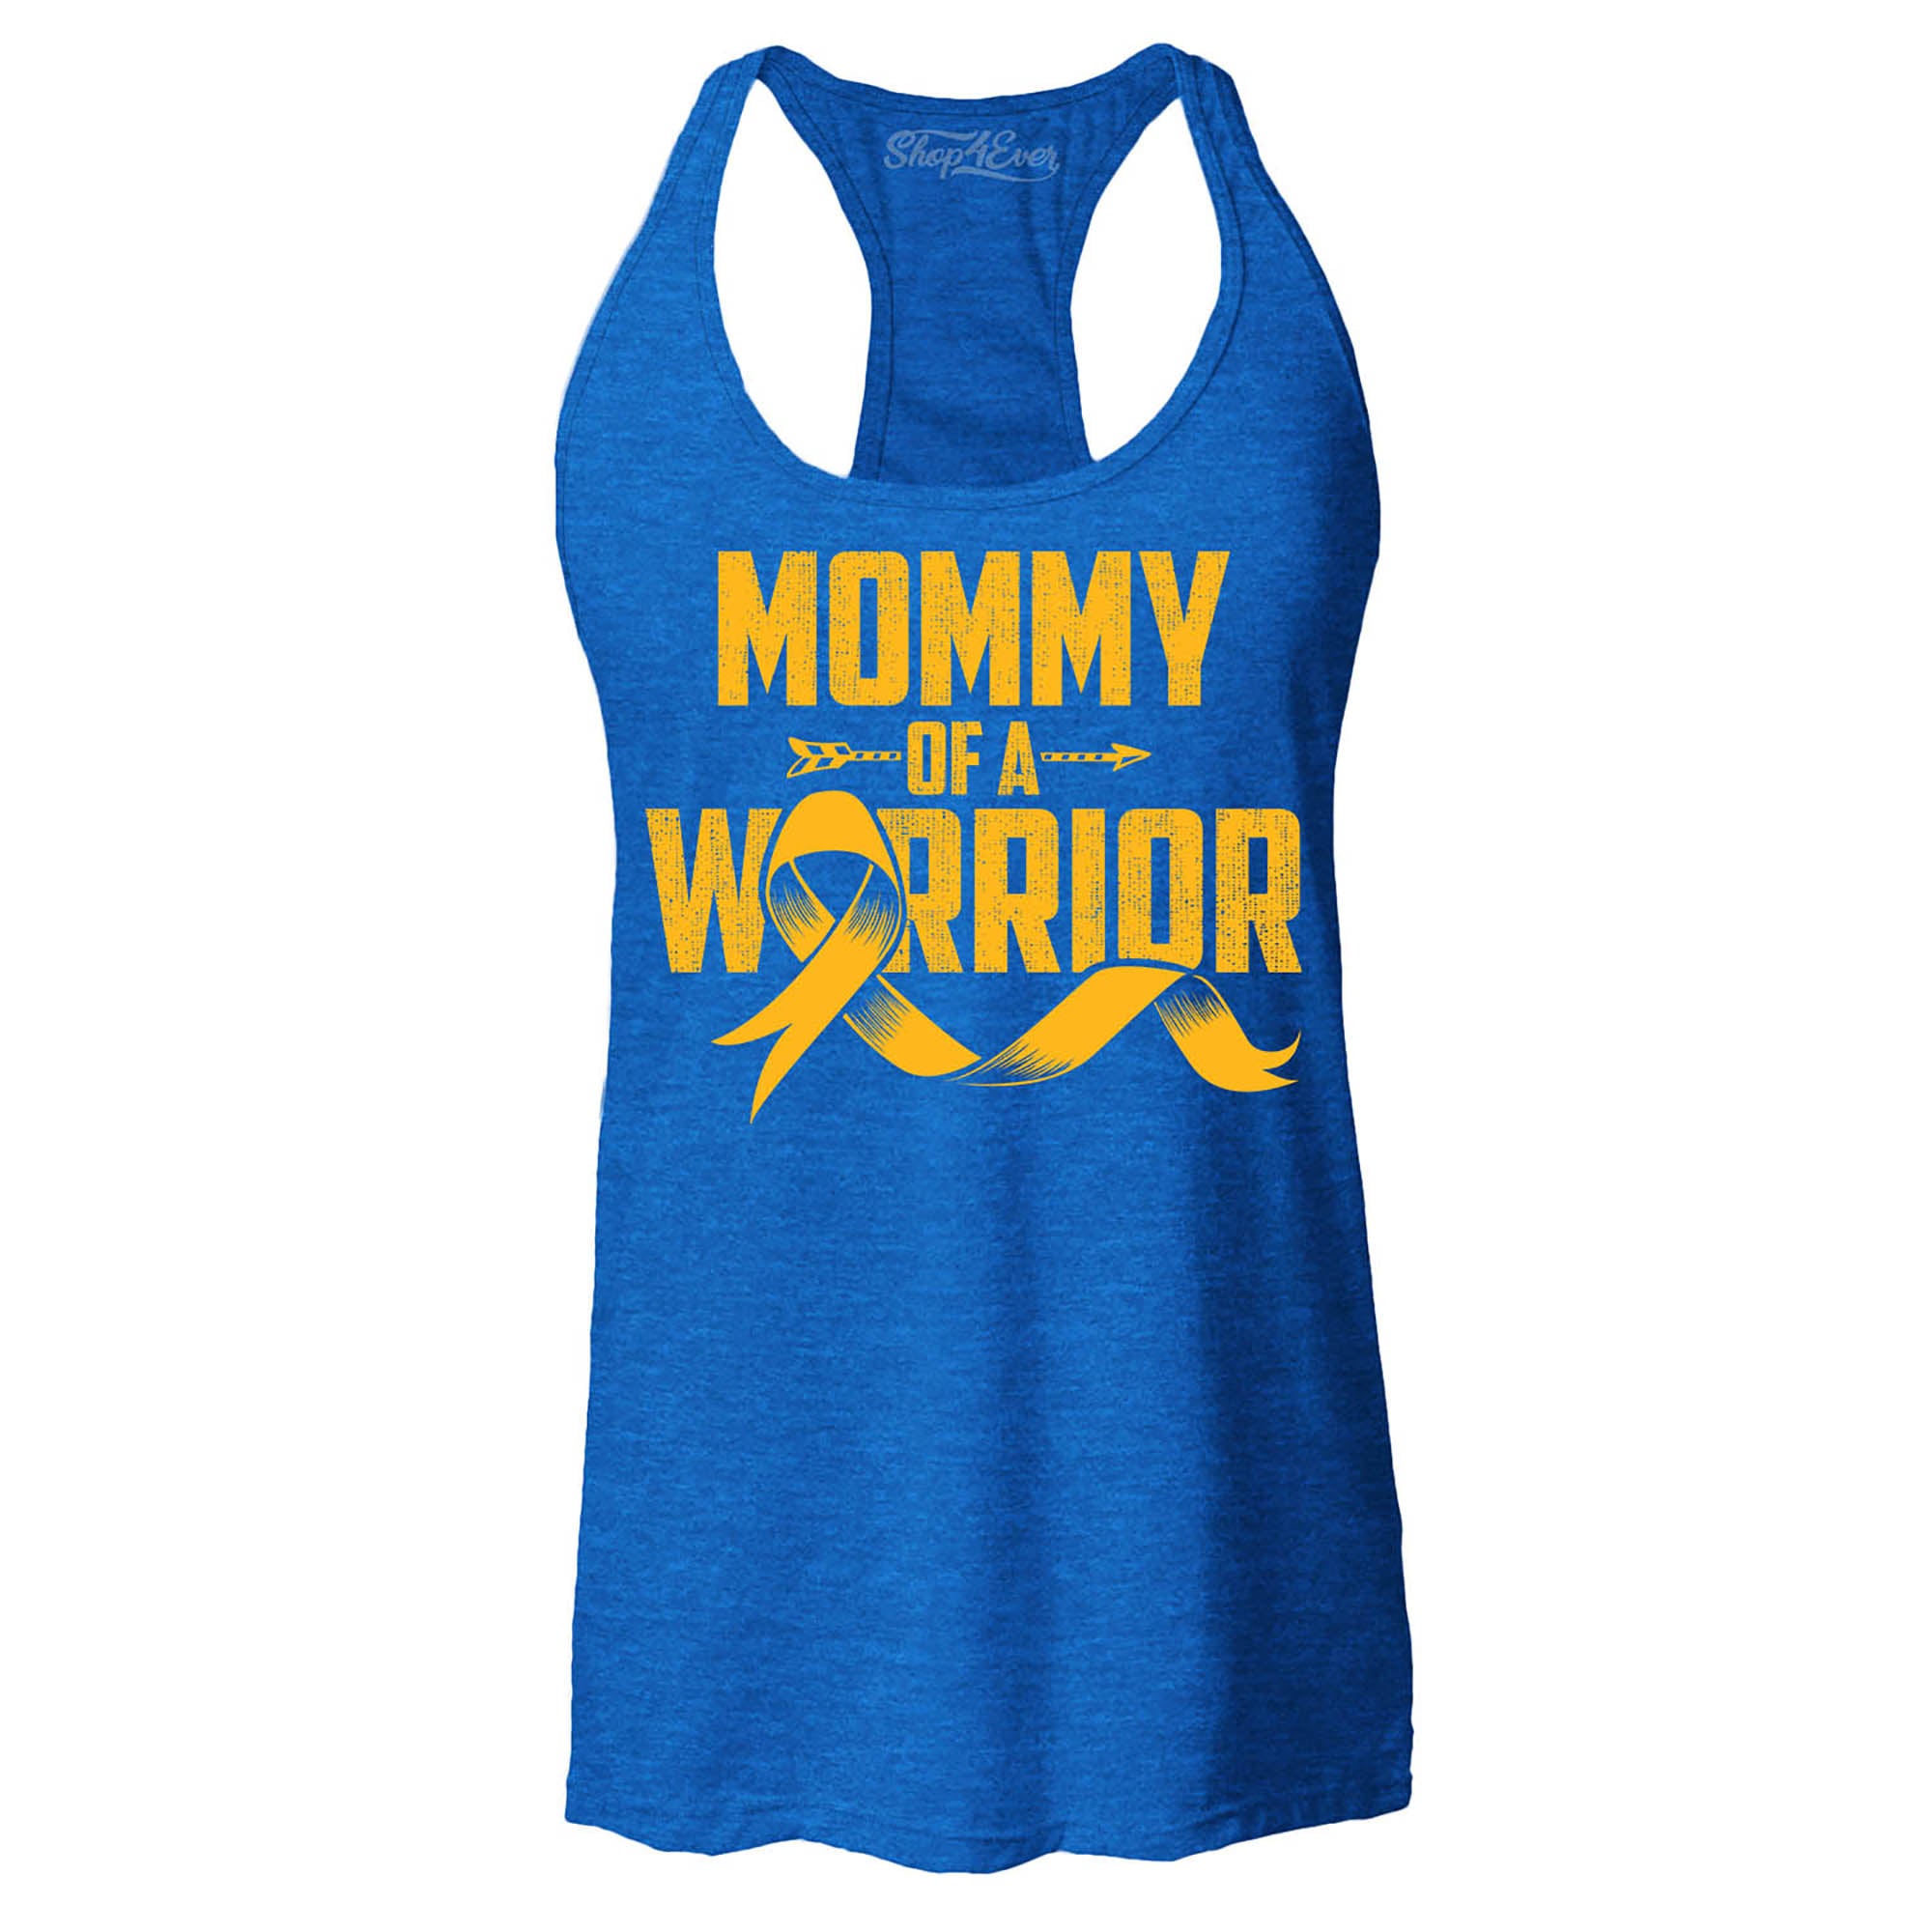 Mommy of a Warrior Childhood Cancer Awareness Women's Racerback Tank Top Slim Fit